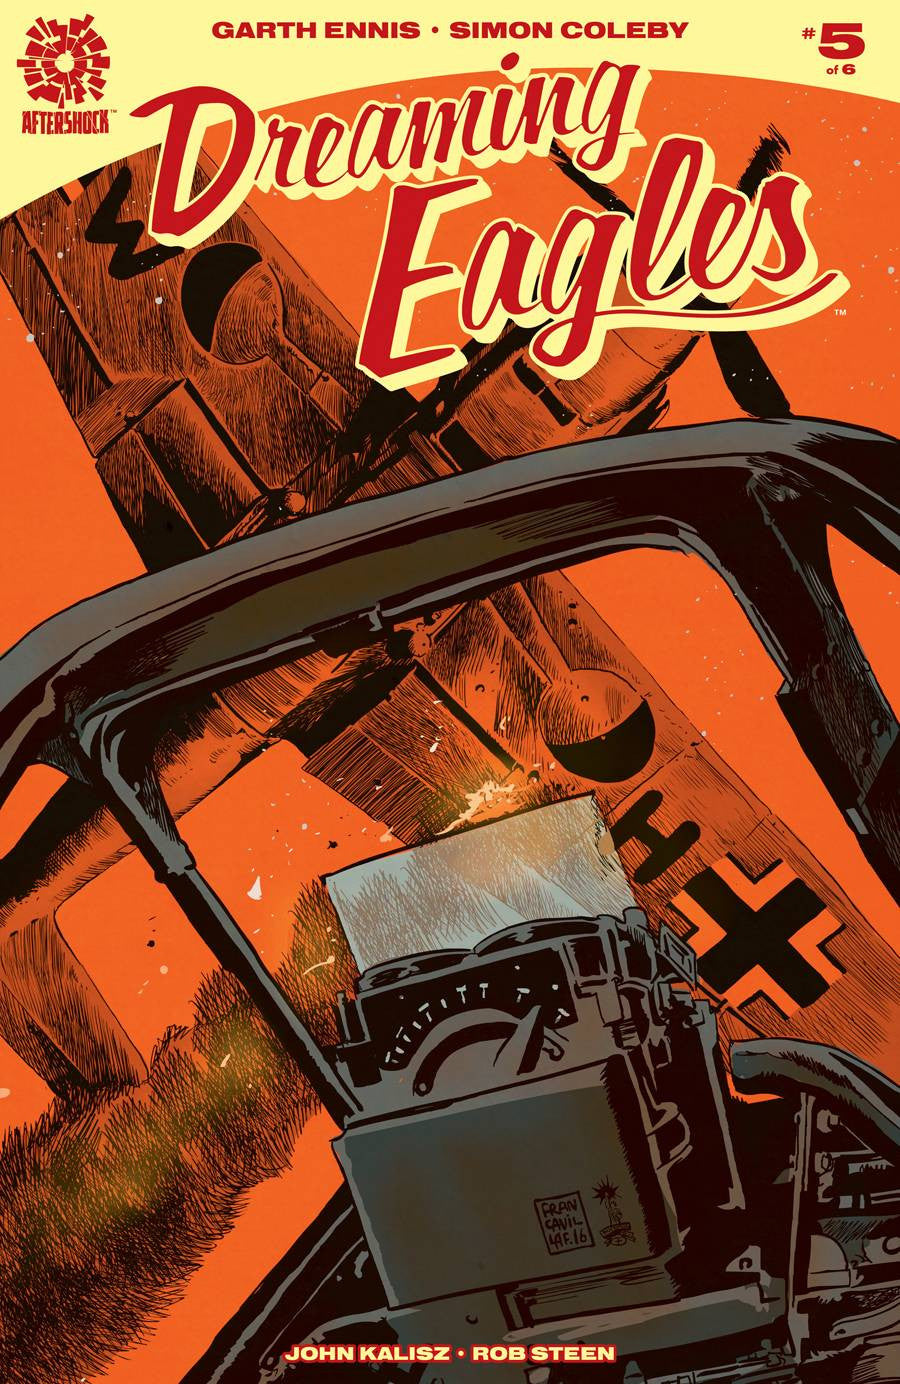 DREAMING EAGLES #5 (MR) COVER